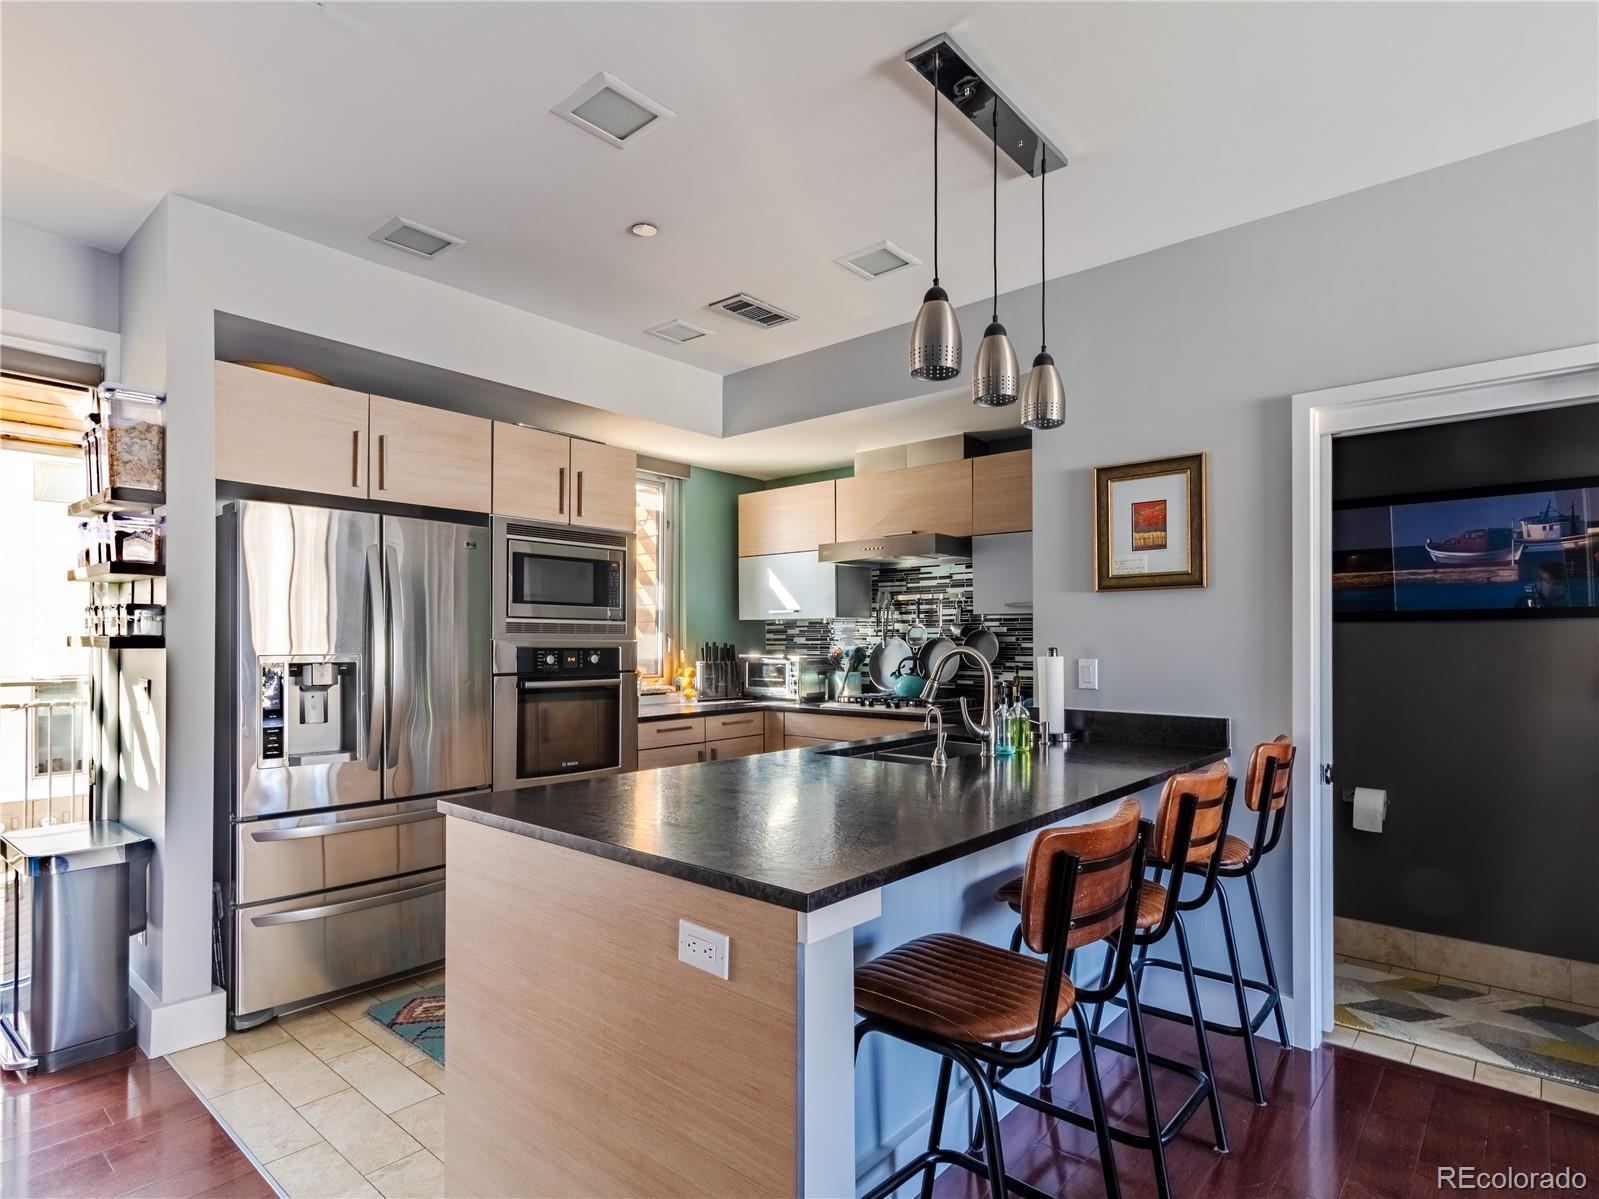 a kitchen with stainless steel appliances granite countertop a refrigerator a stove a sink dishwasher a dining table and chairs with wooden floor